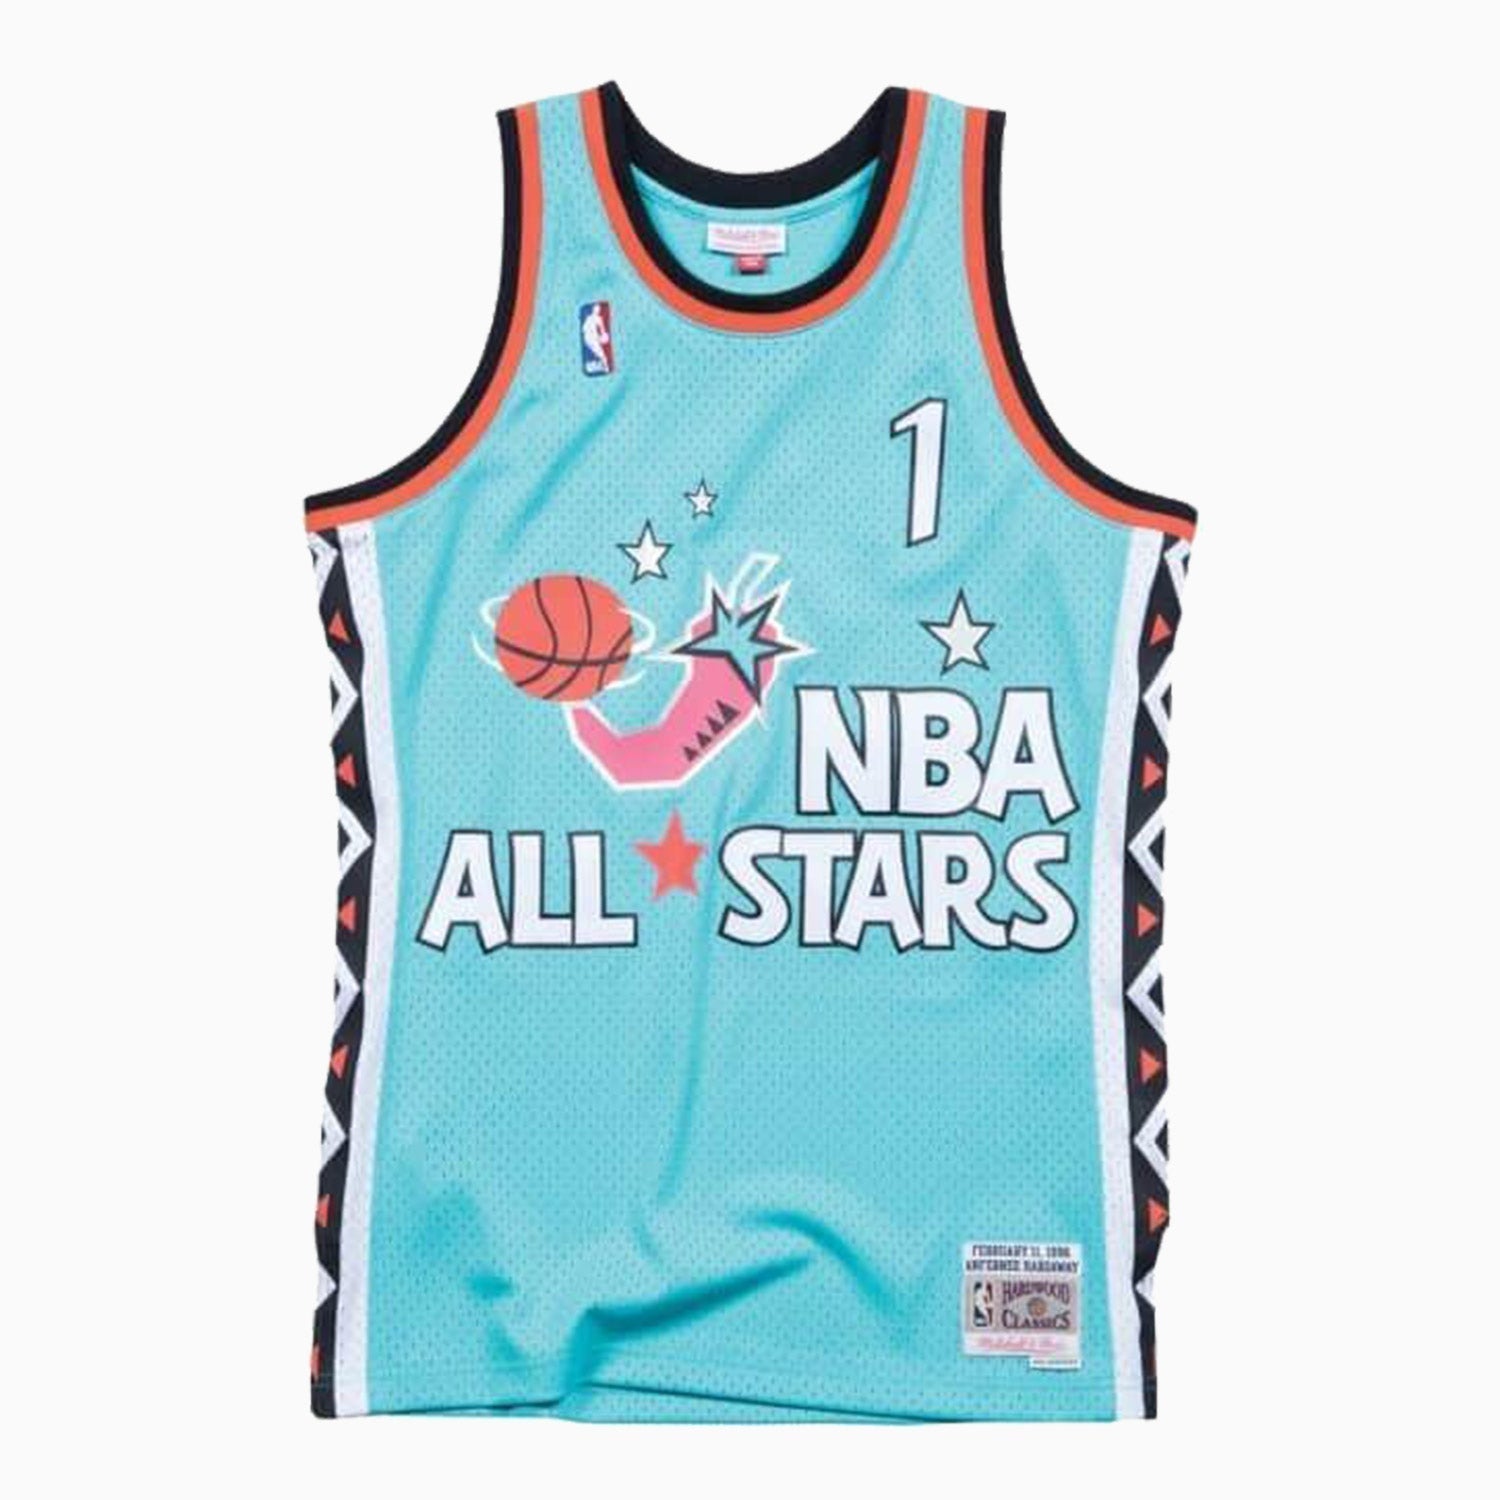 1996 Nba All Star Jersey Mourning XXL 100% AUTHENTIC Adidas